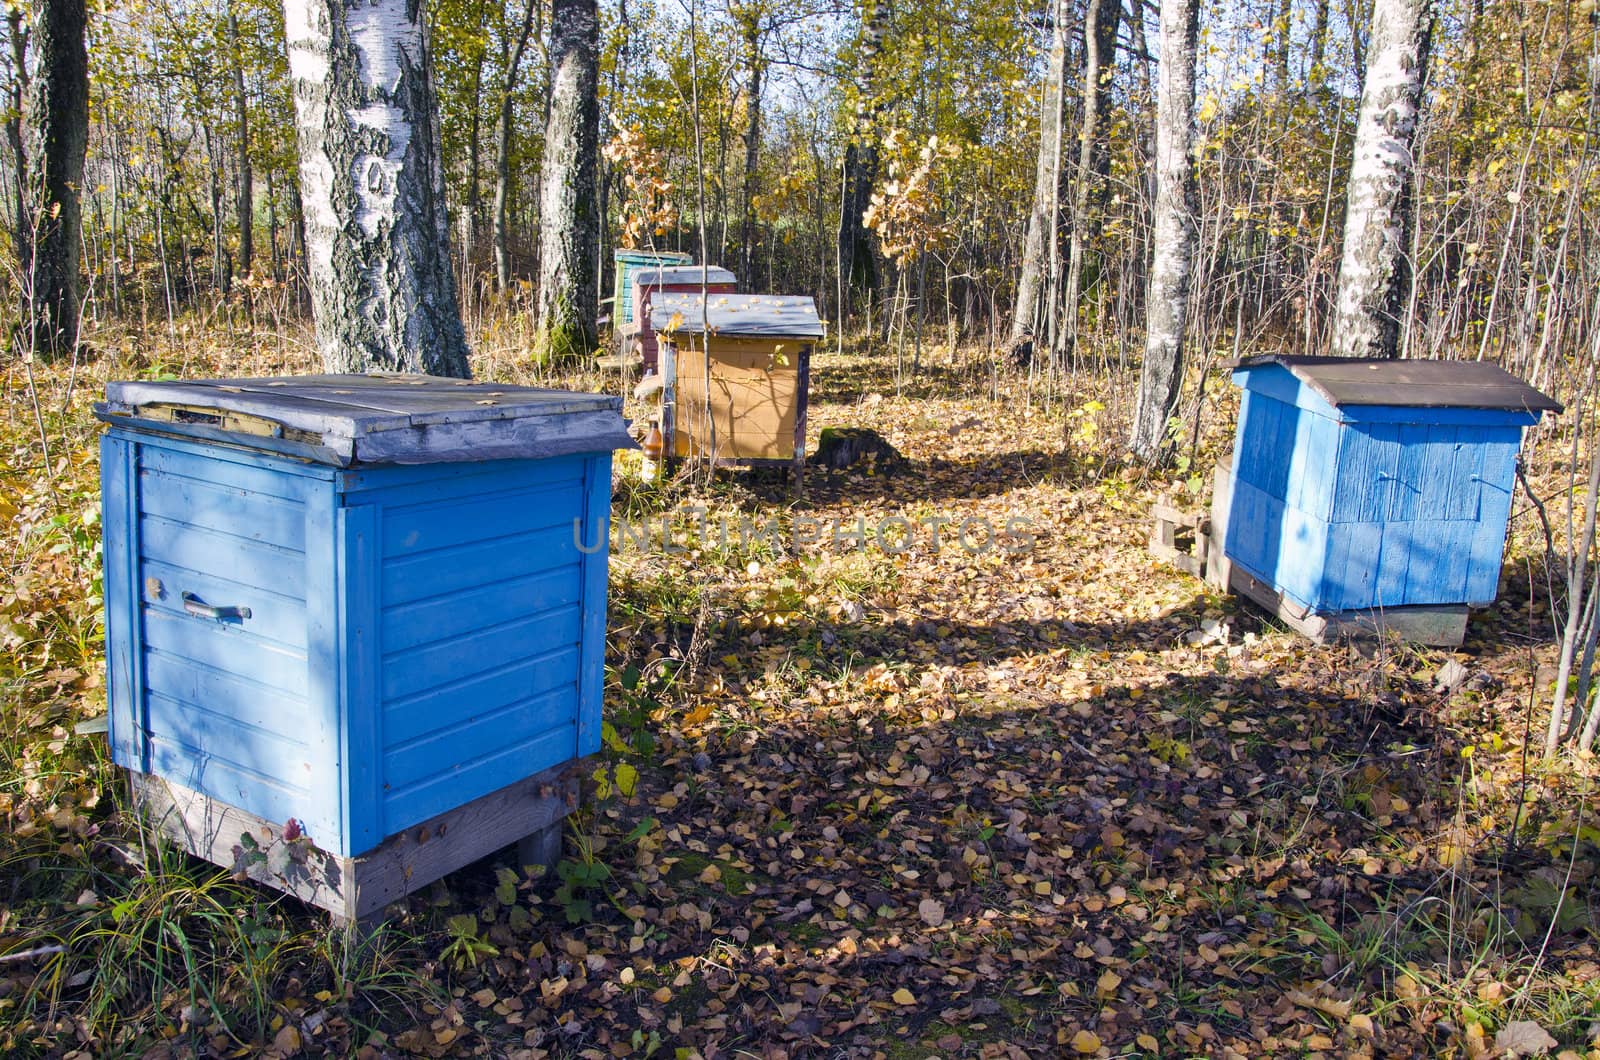 Colored hives standing between birch trees in autumn. Beautiful natural backdrop. Bees preparing for winter.